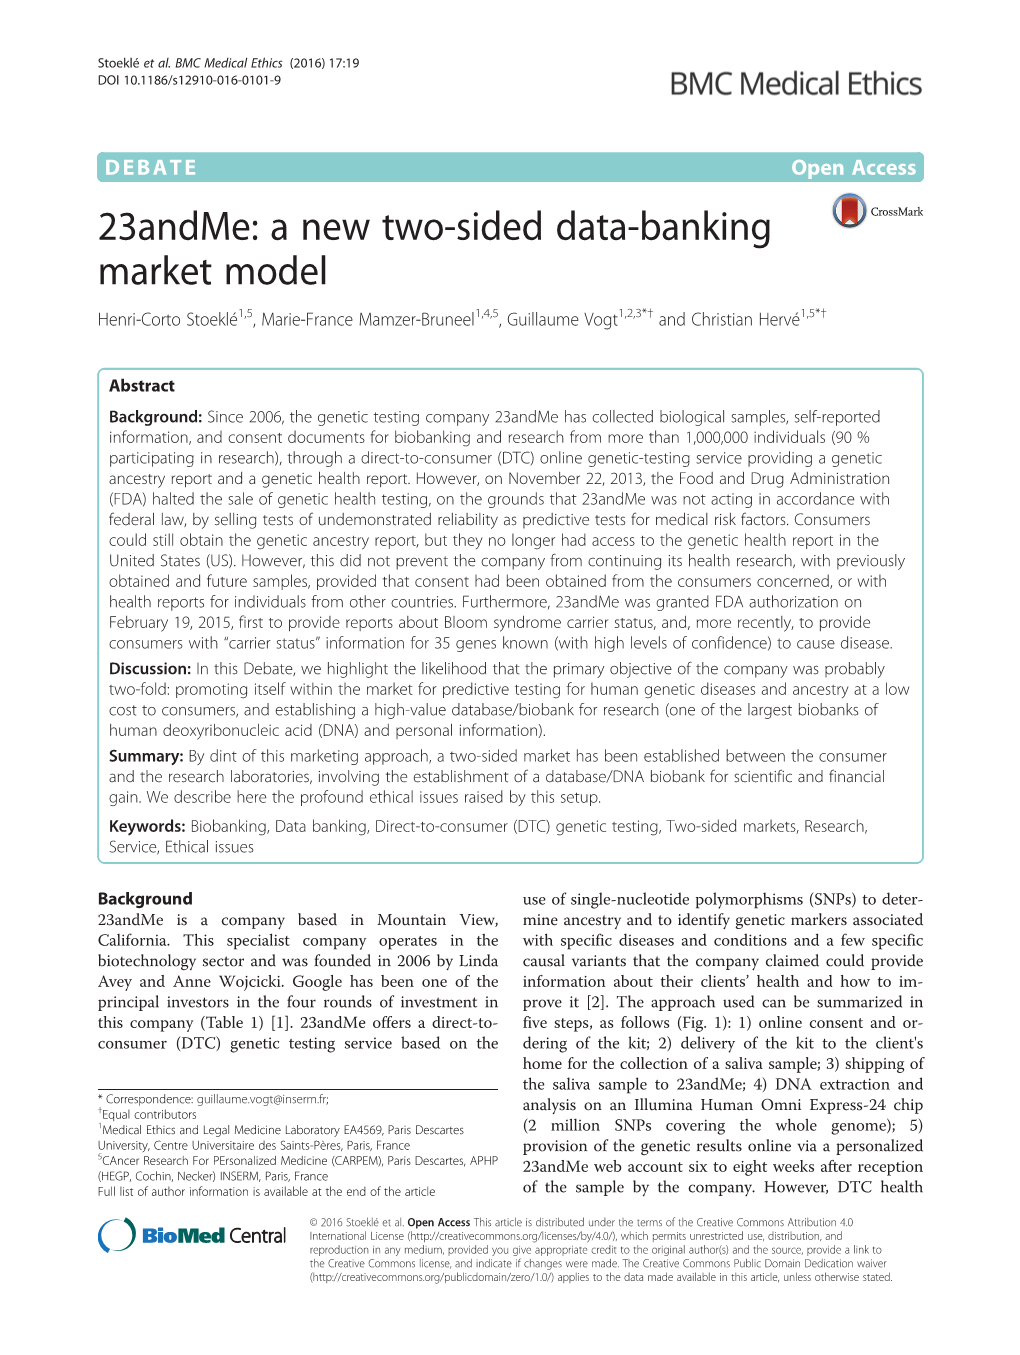 23Andme: a New Two-Sided Data-Banking Market Model Henri-Corto Stoeklé1,5, Marie-France Mamzer-Bruneel1,4,5, Guillaume Vogt1,2,3*† and Christian Hervé1,5*†